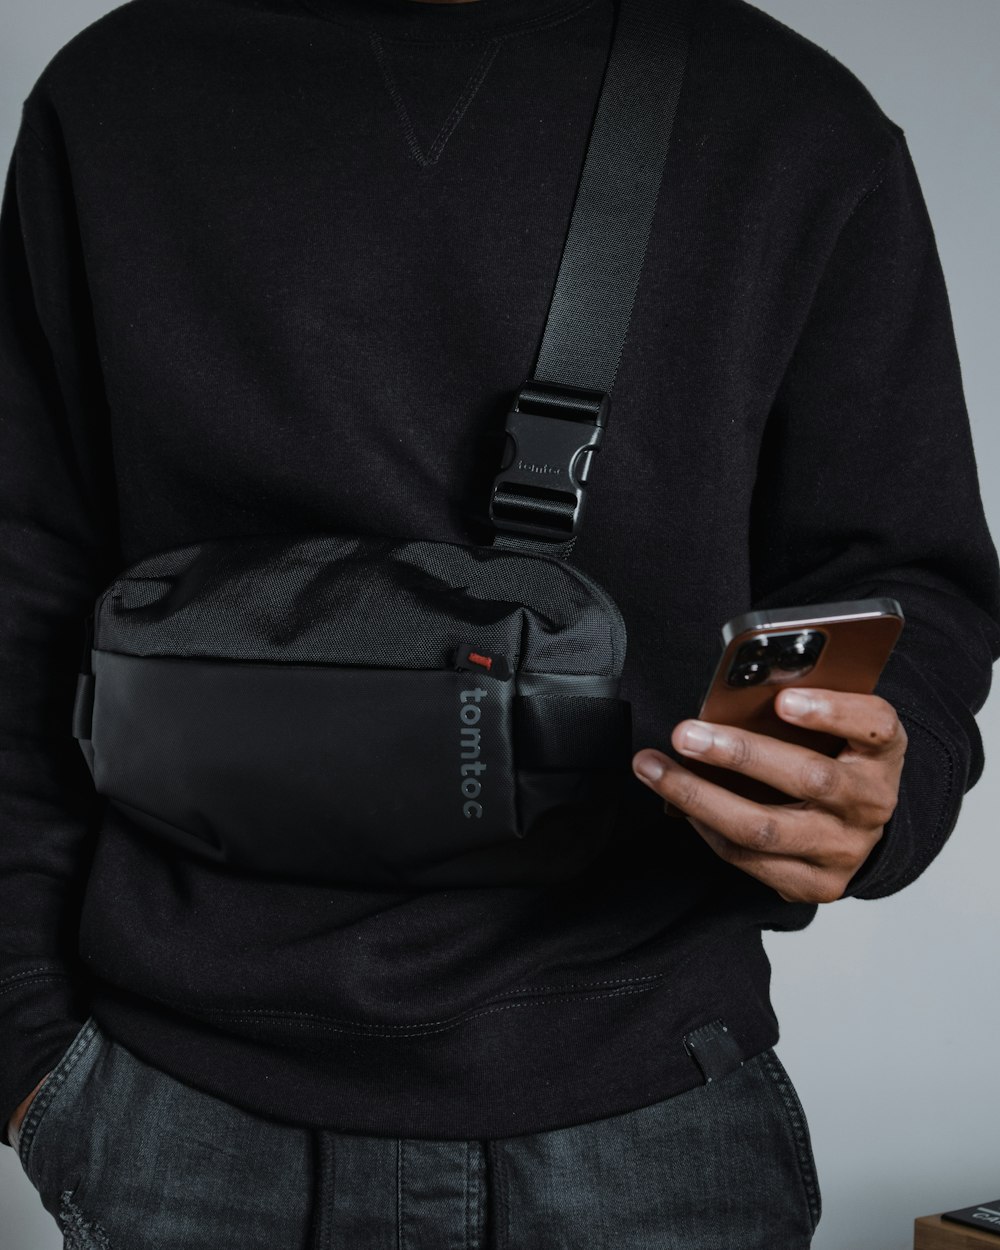 a man holding a cell phone and a fanny bag